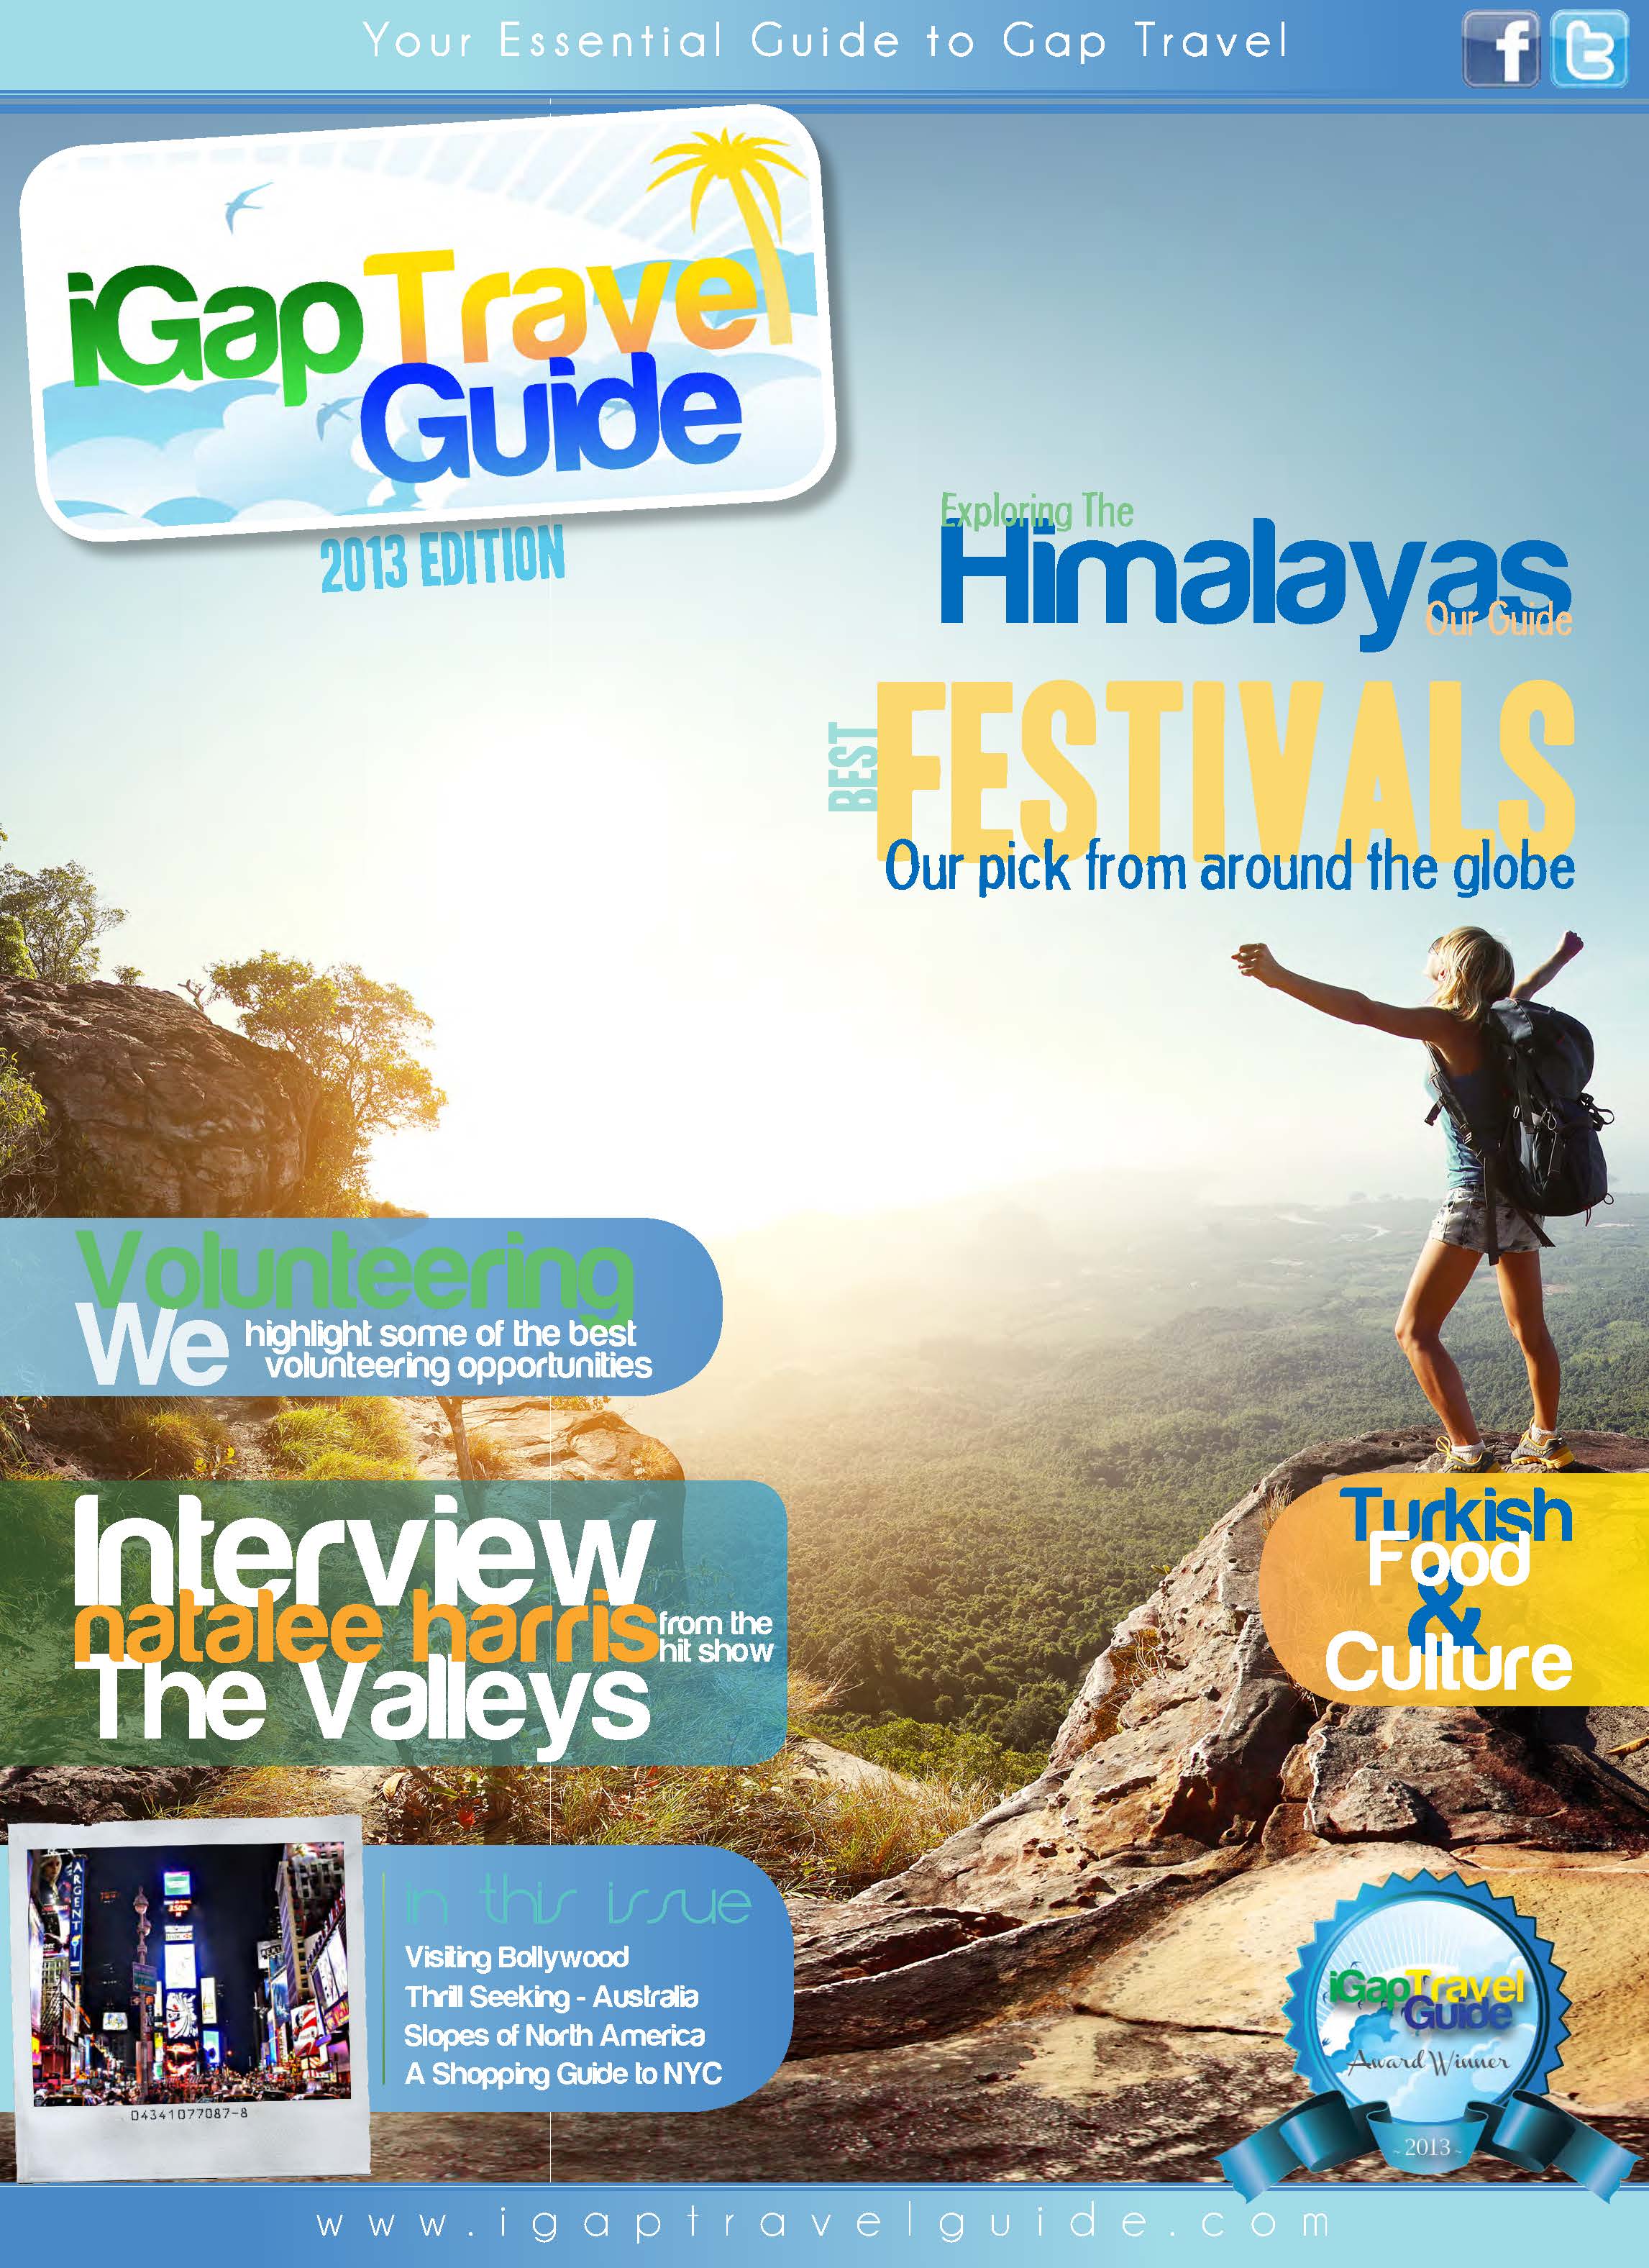 The iGap Travel Guide 2013 - Cover Image